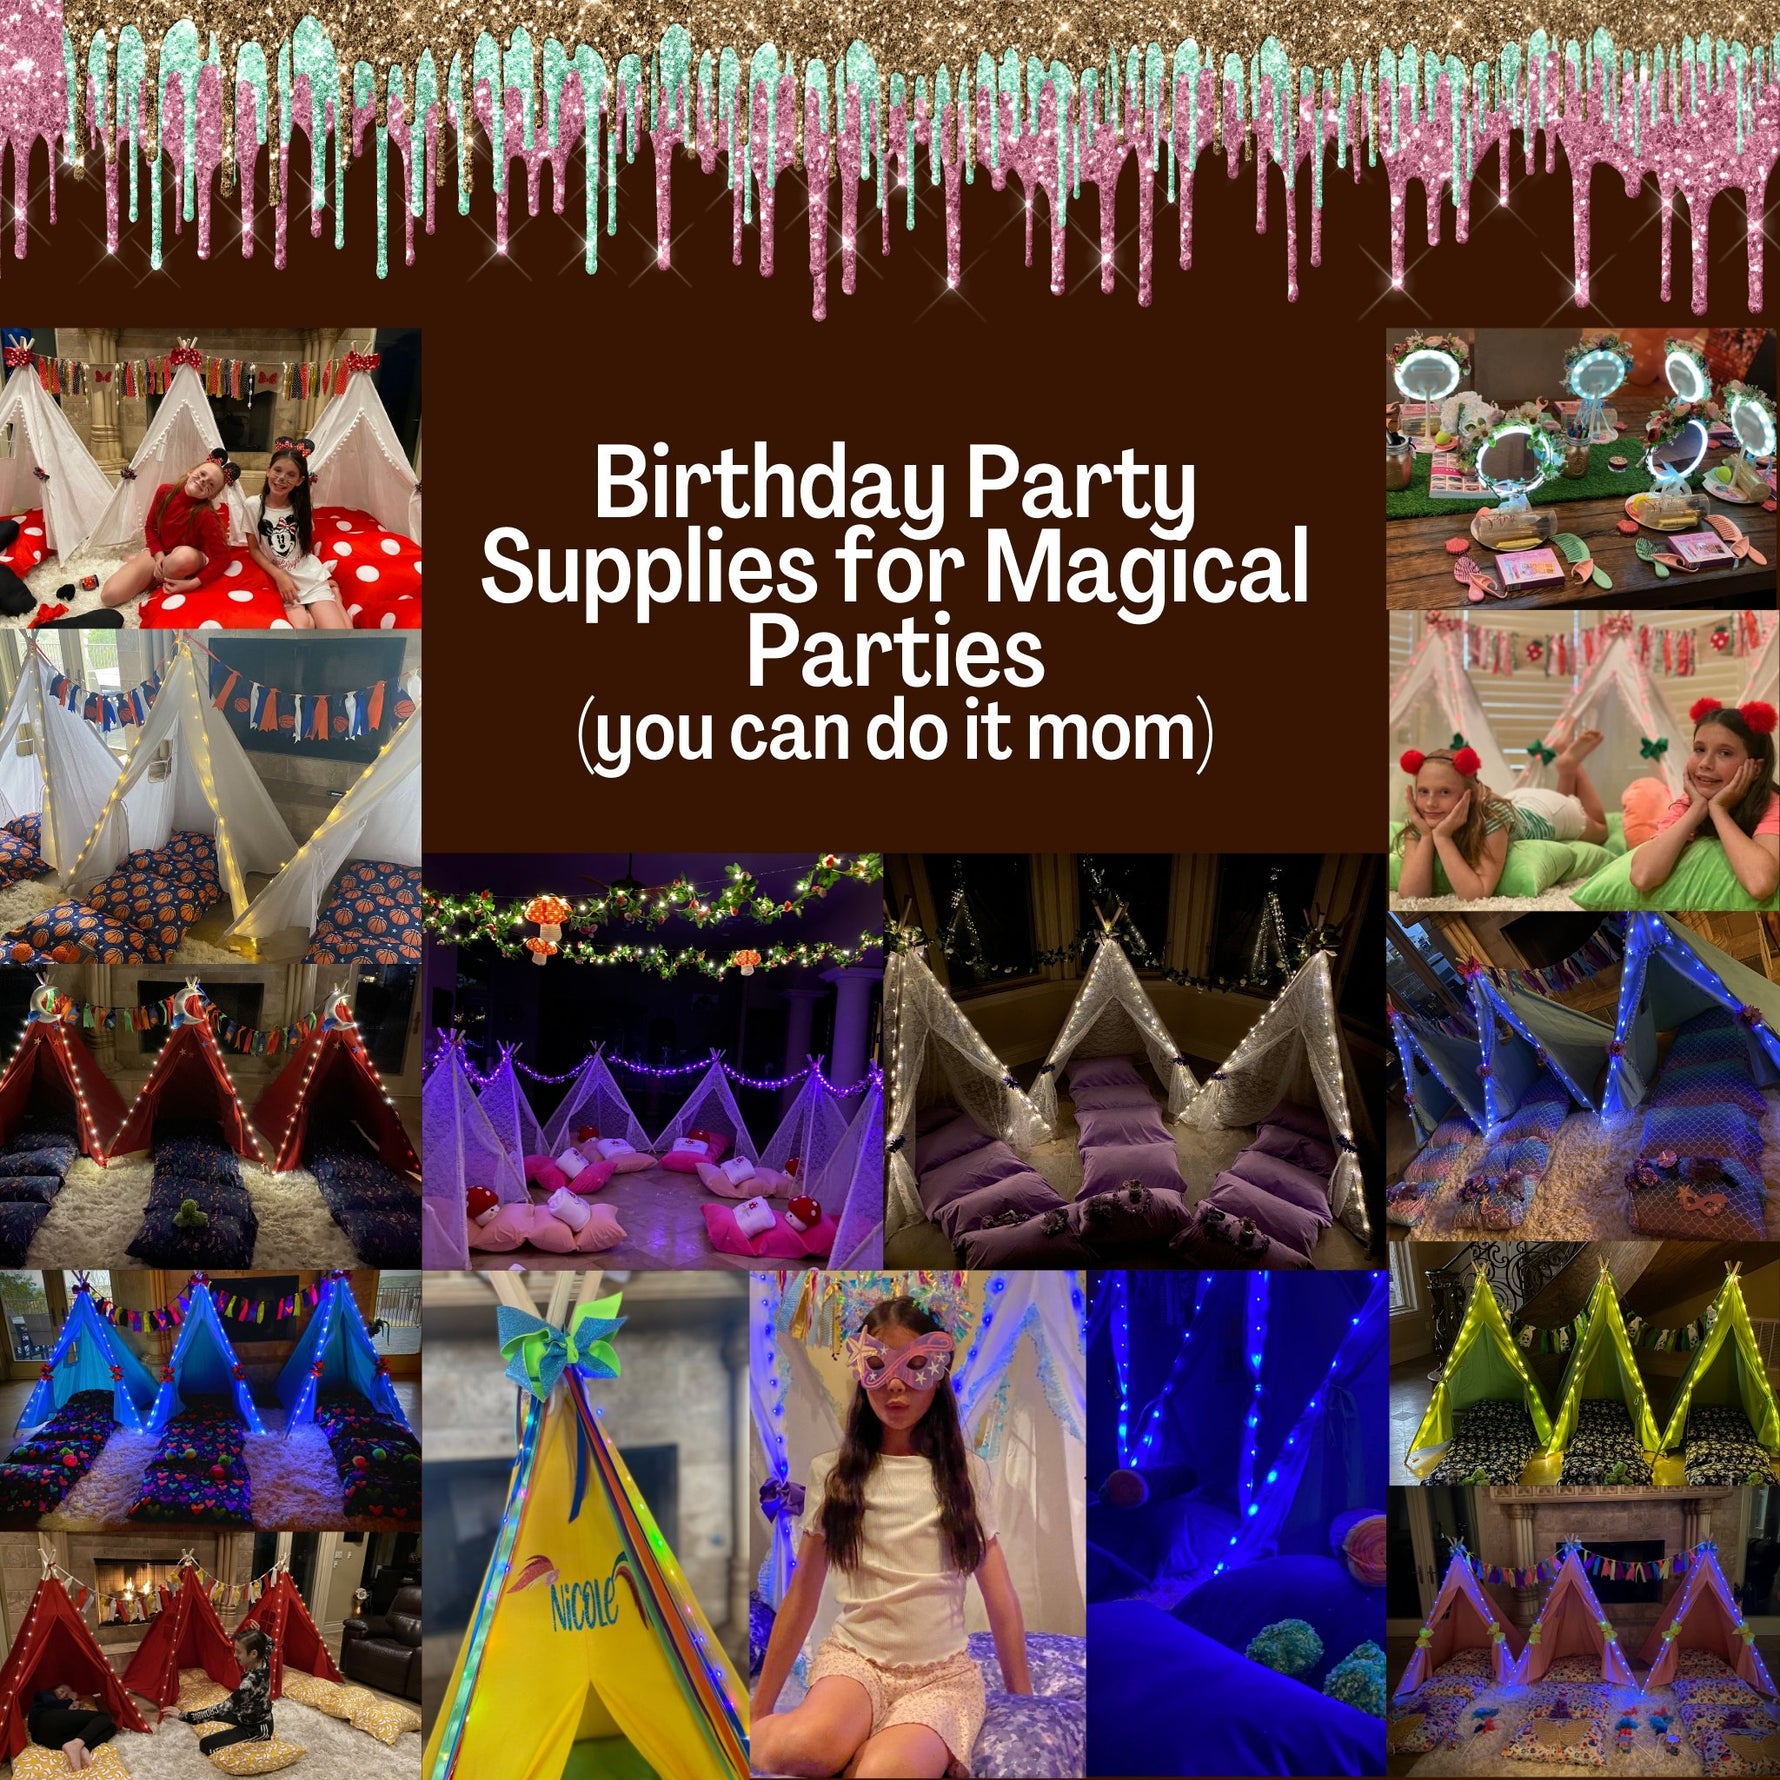 Birthday Party Supplies for Magical Parties - Chicky Chicky Bling Bling, LLC